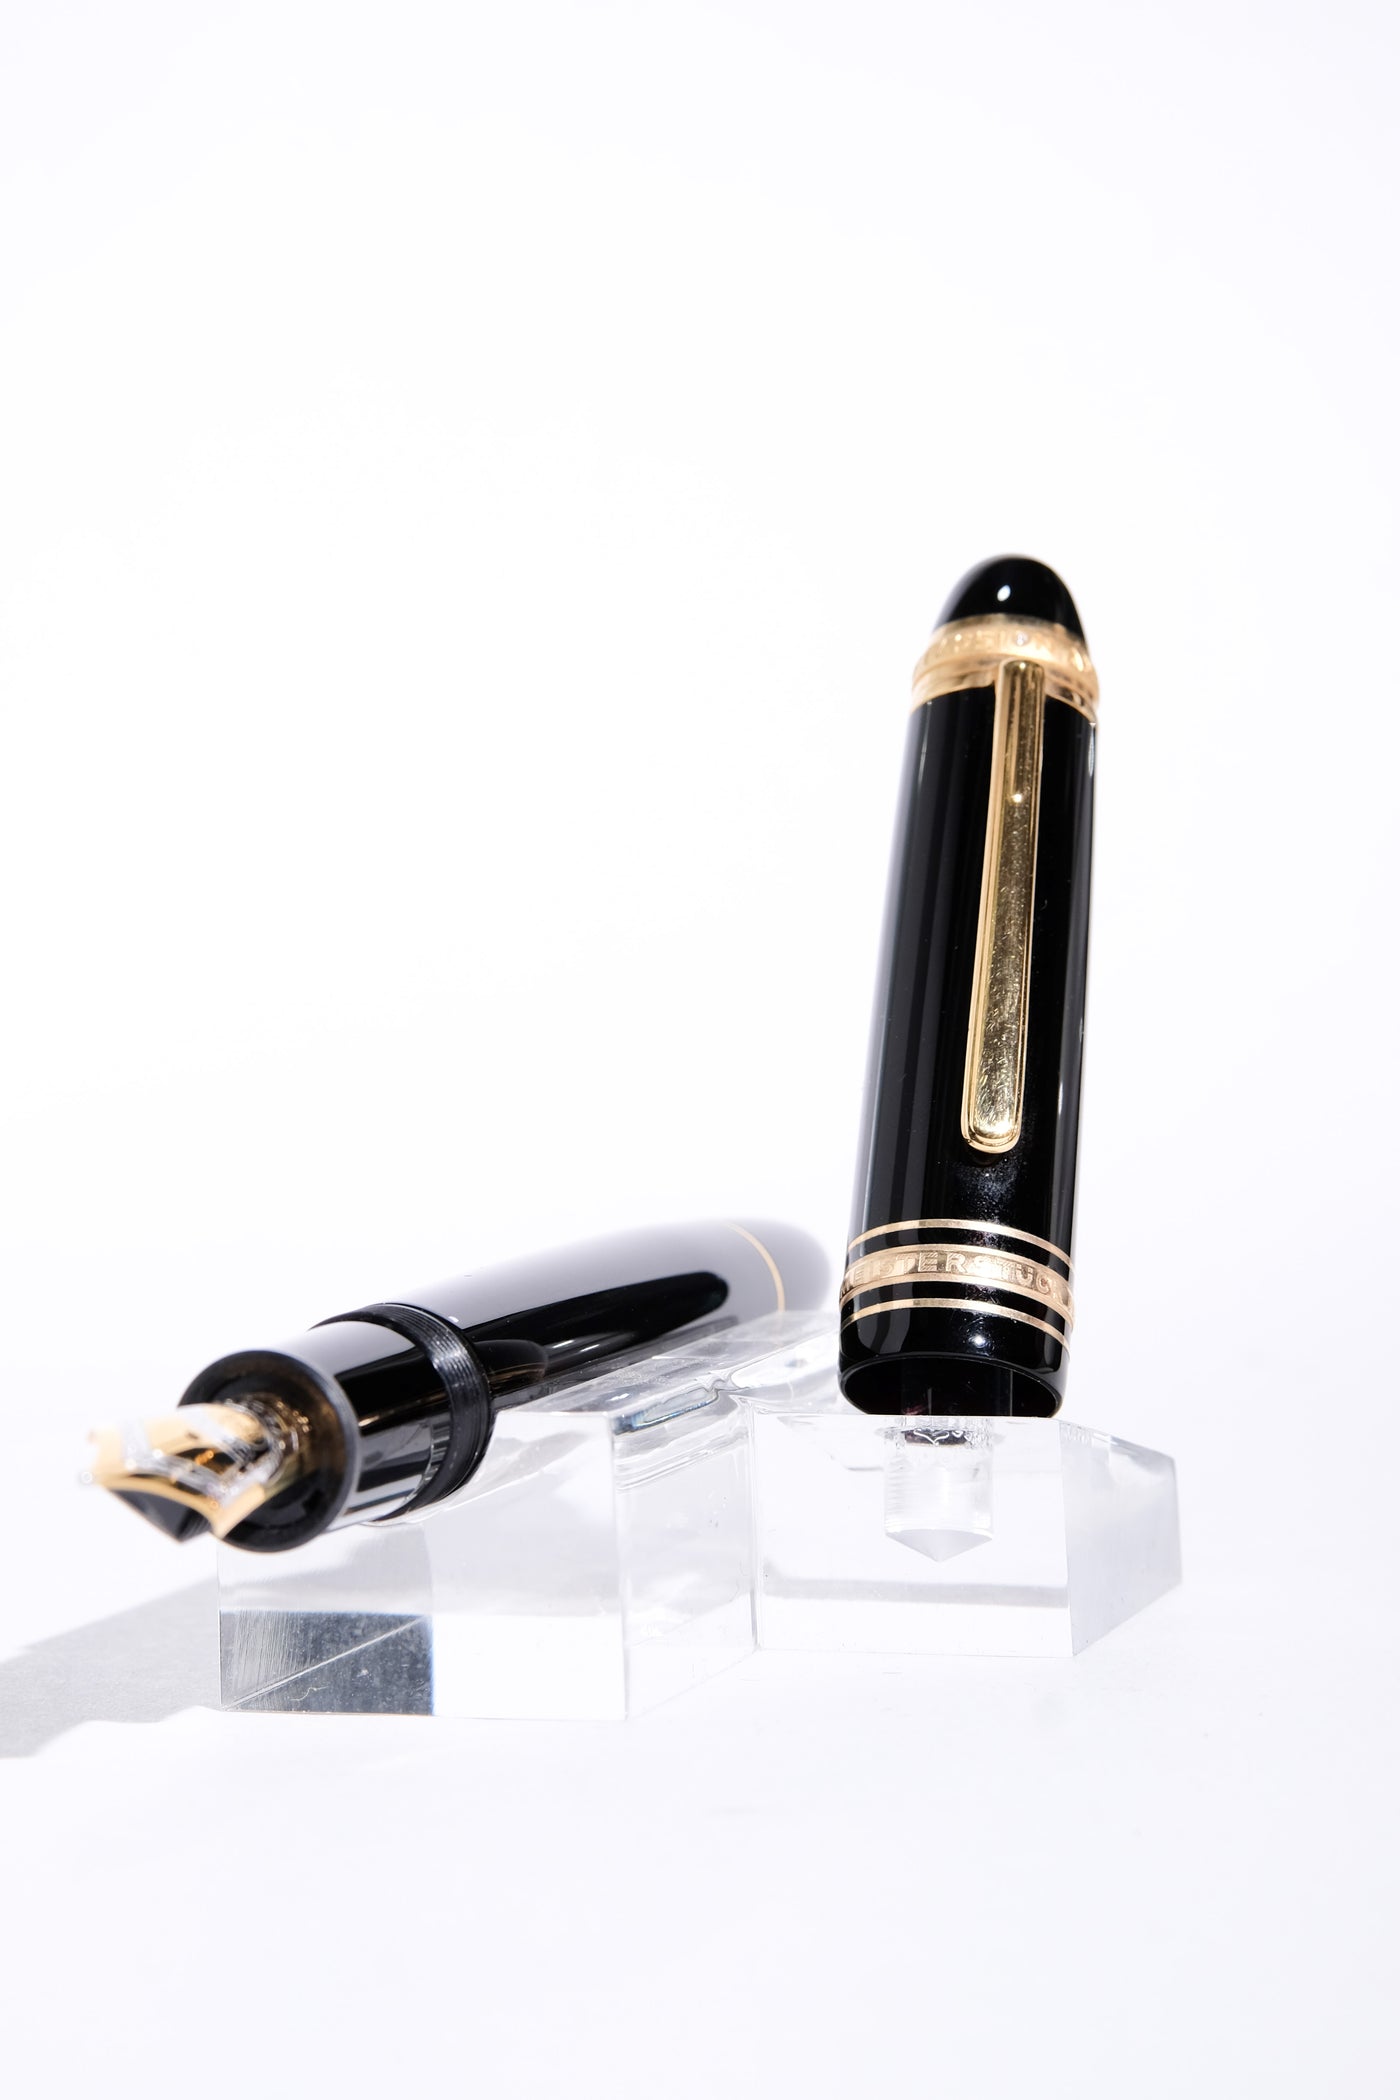 Pre-Owned Montblanc Meisterstuck 149 75th Anniversary Fountain Pen